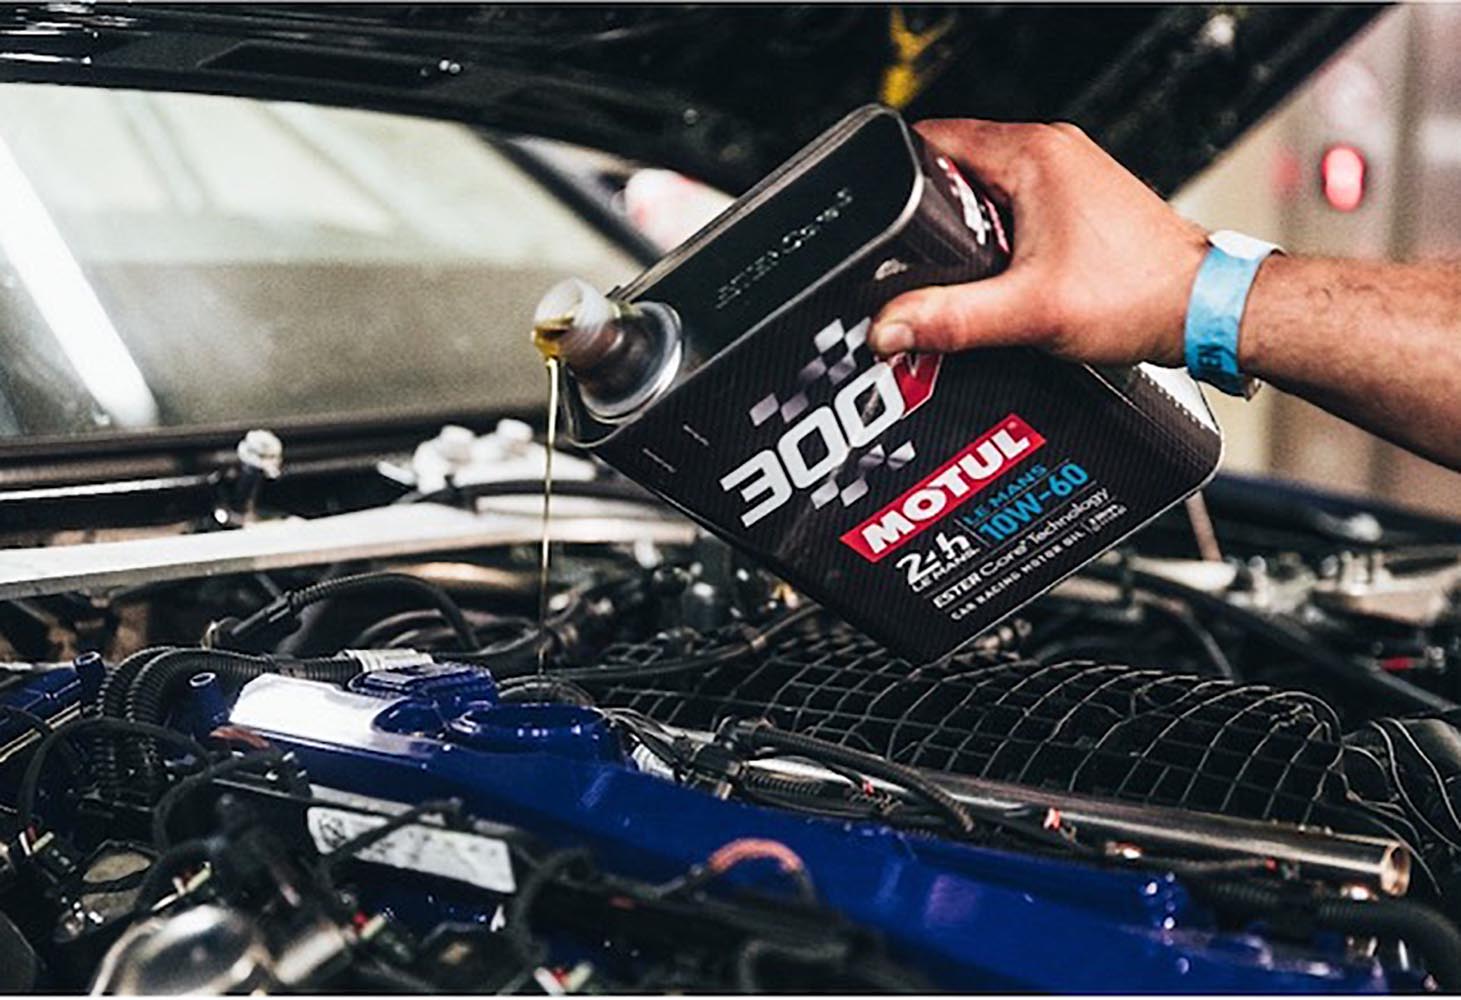 Motul is official lubricant supplier for Sepang endurance race